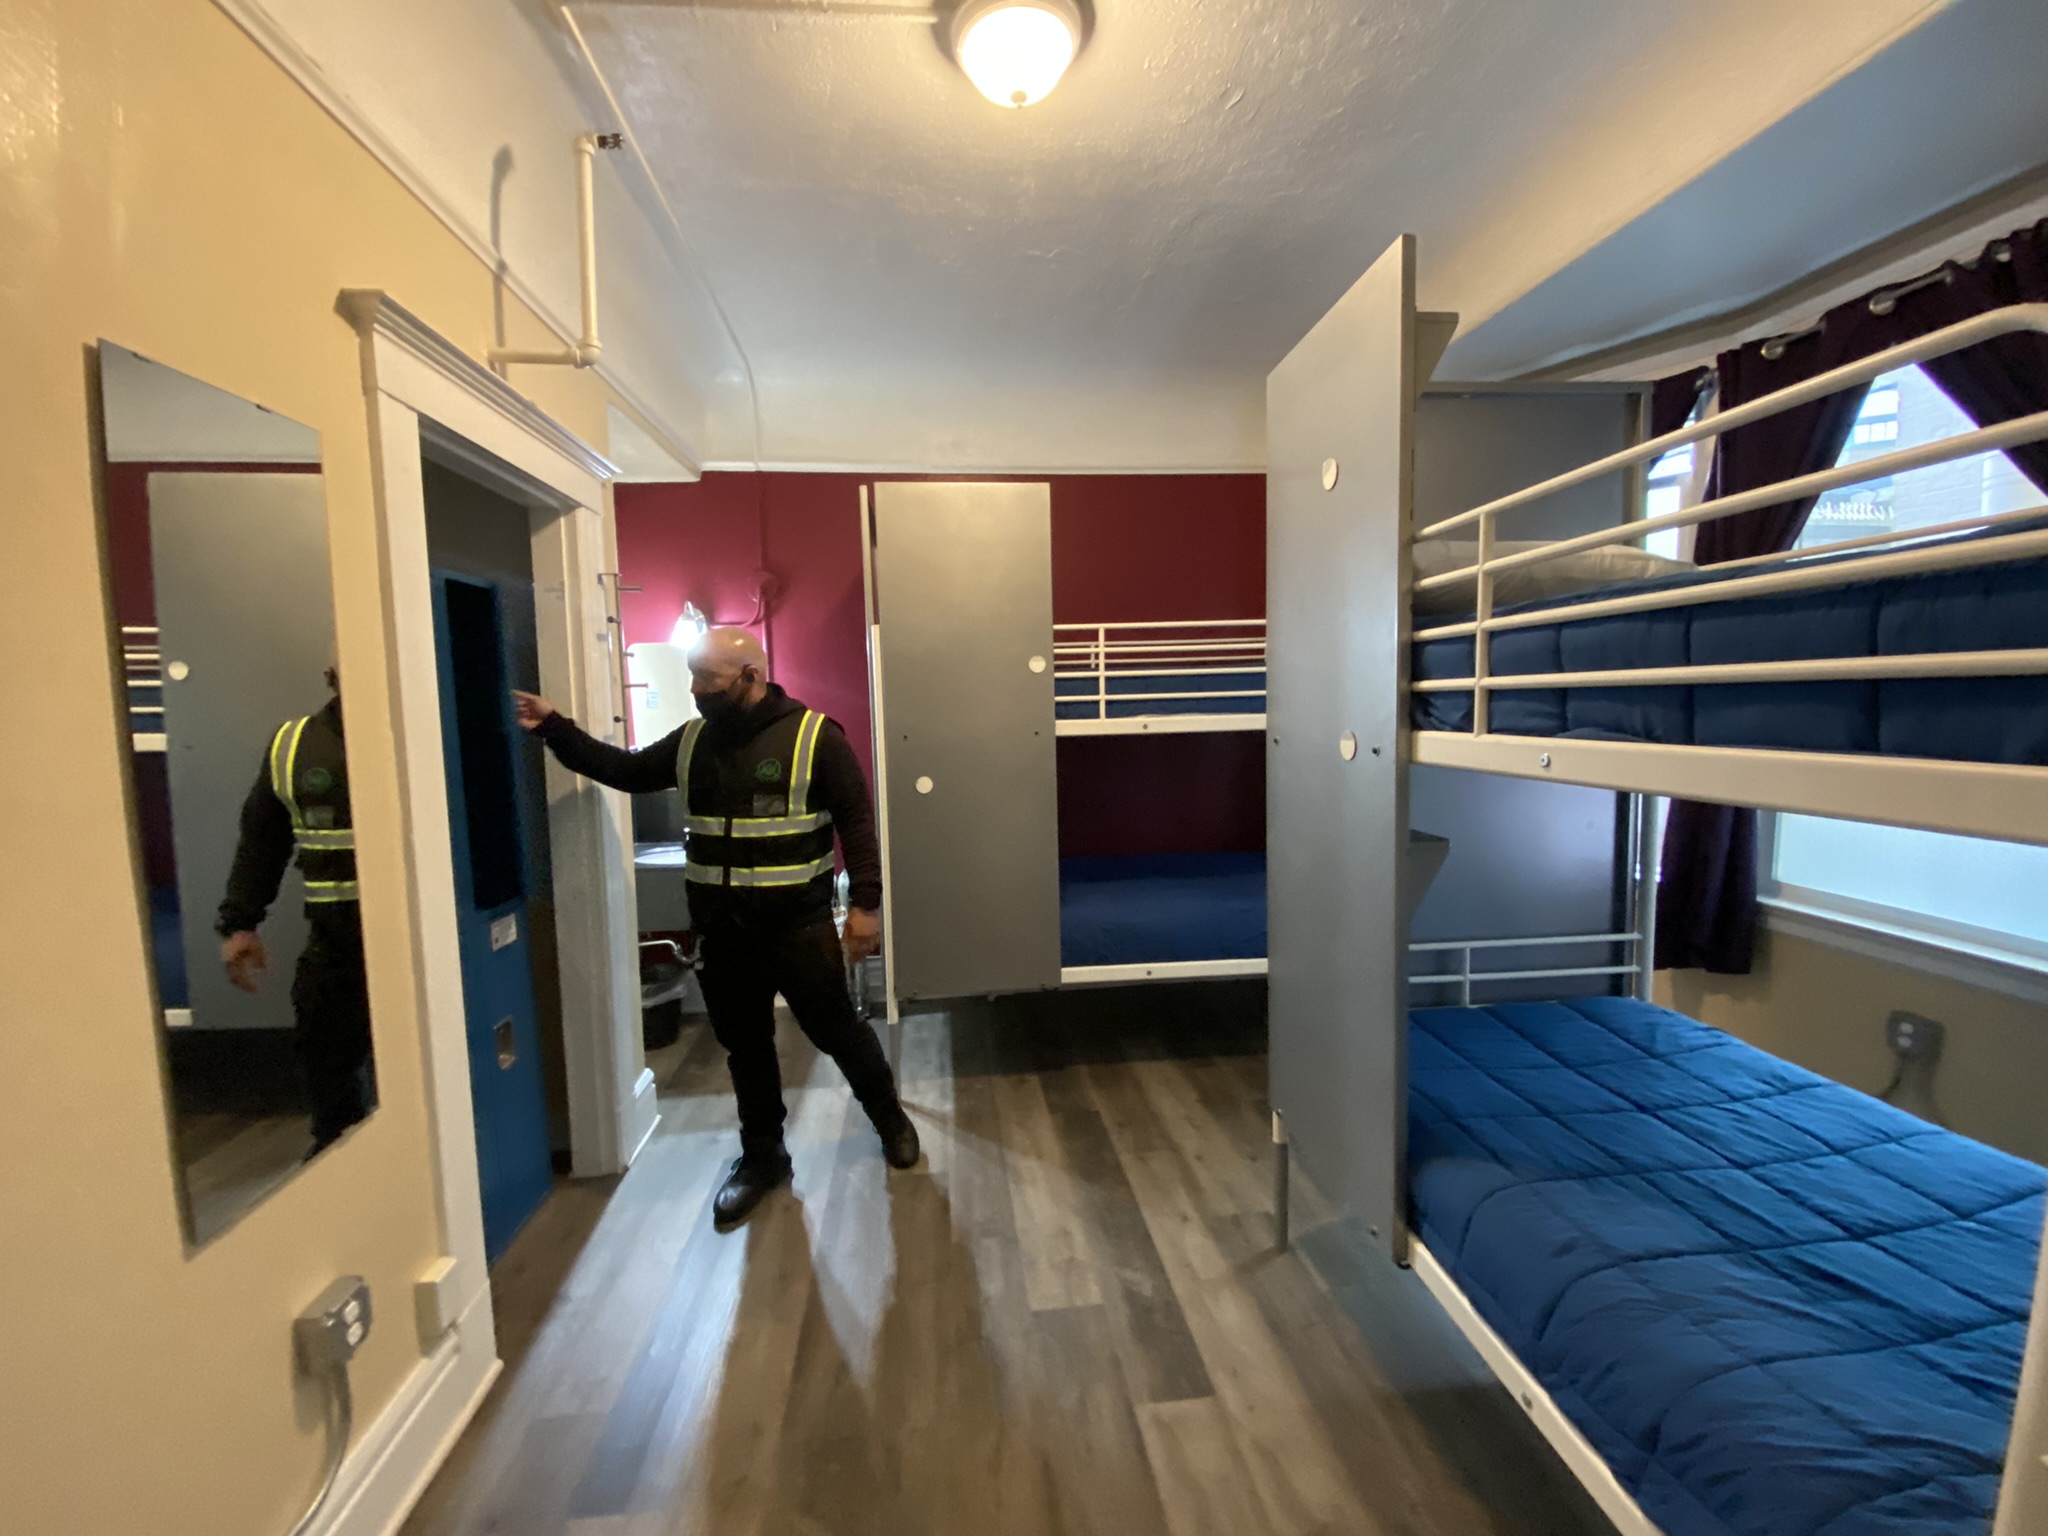 Urban Alchemy staff member shows off a quad room inside 711 Post St., San Francisco's new 260-bed shelter